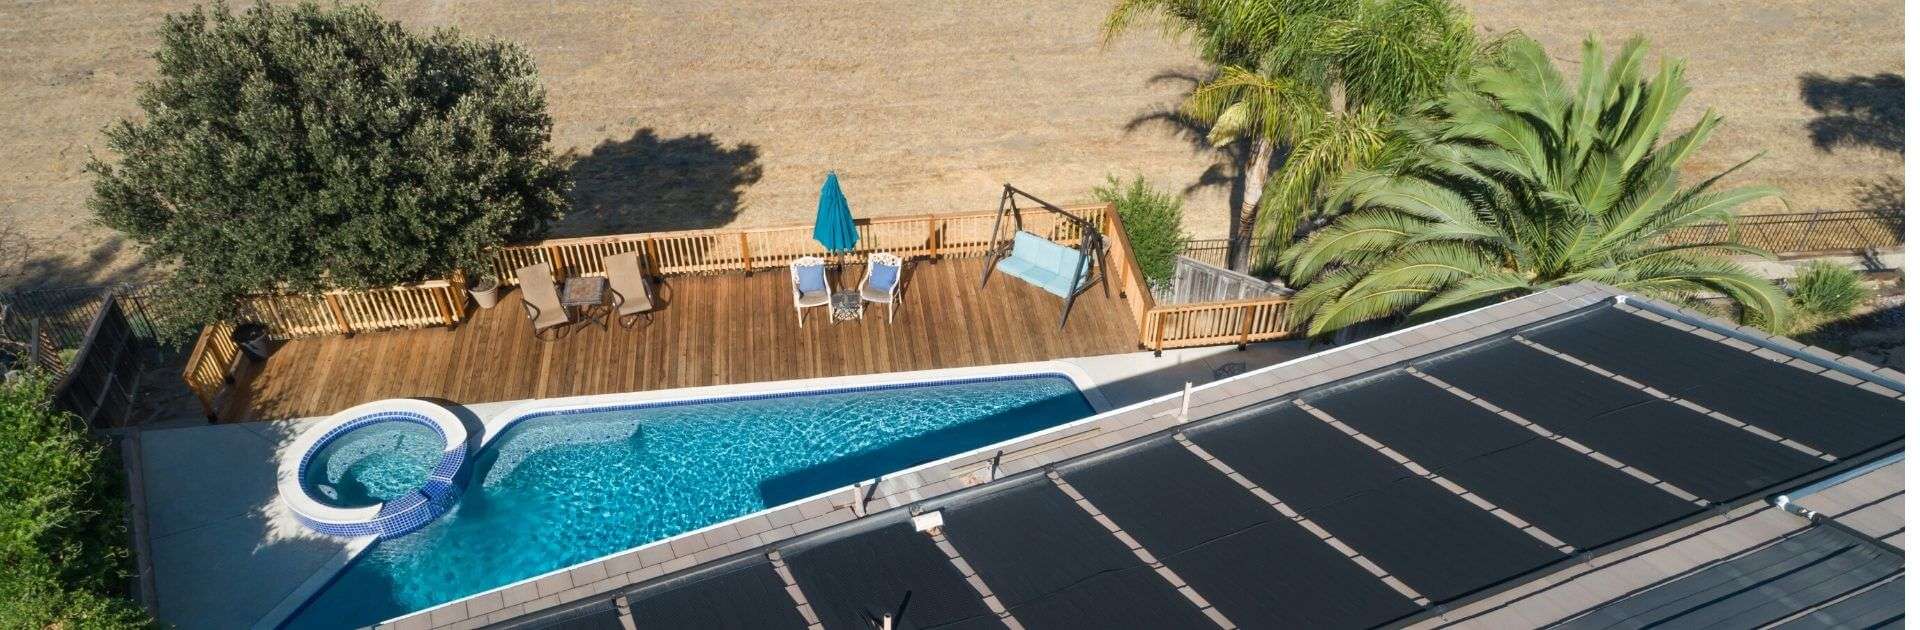 Brighte Solar Pool Heating Systems Services near you ...